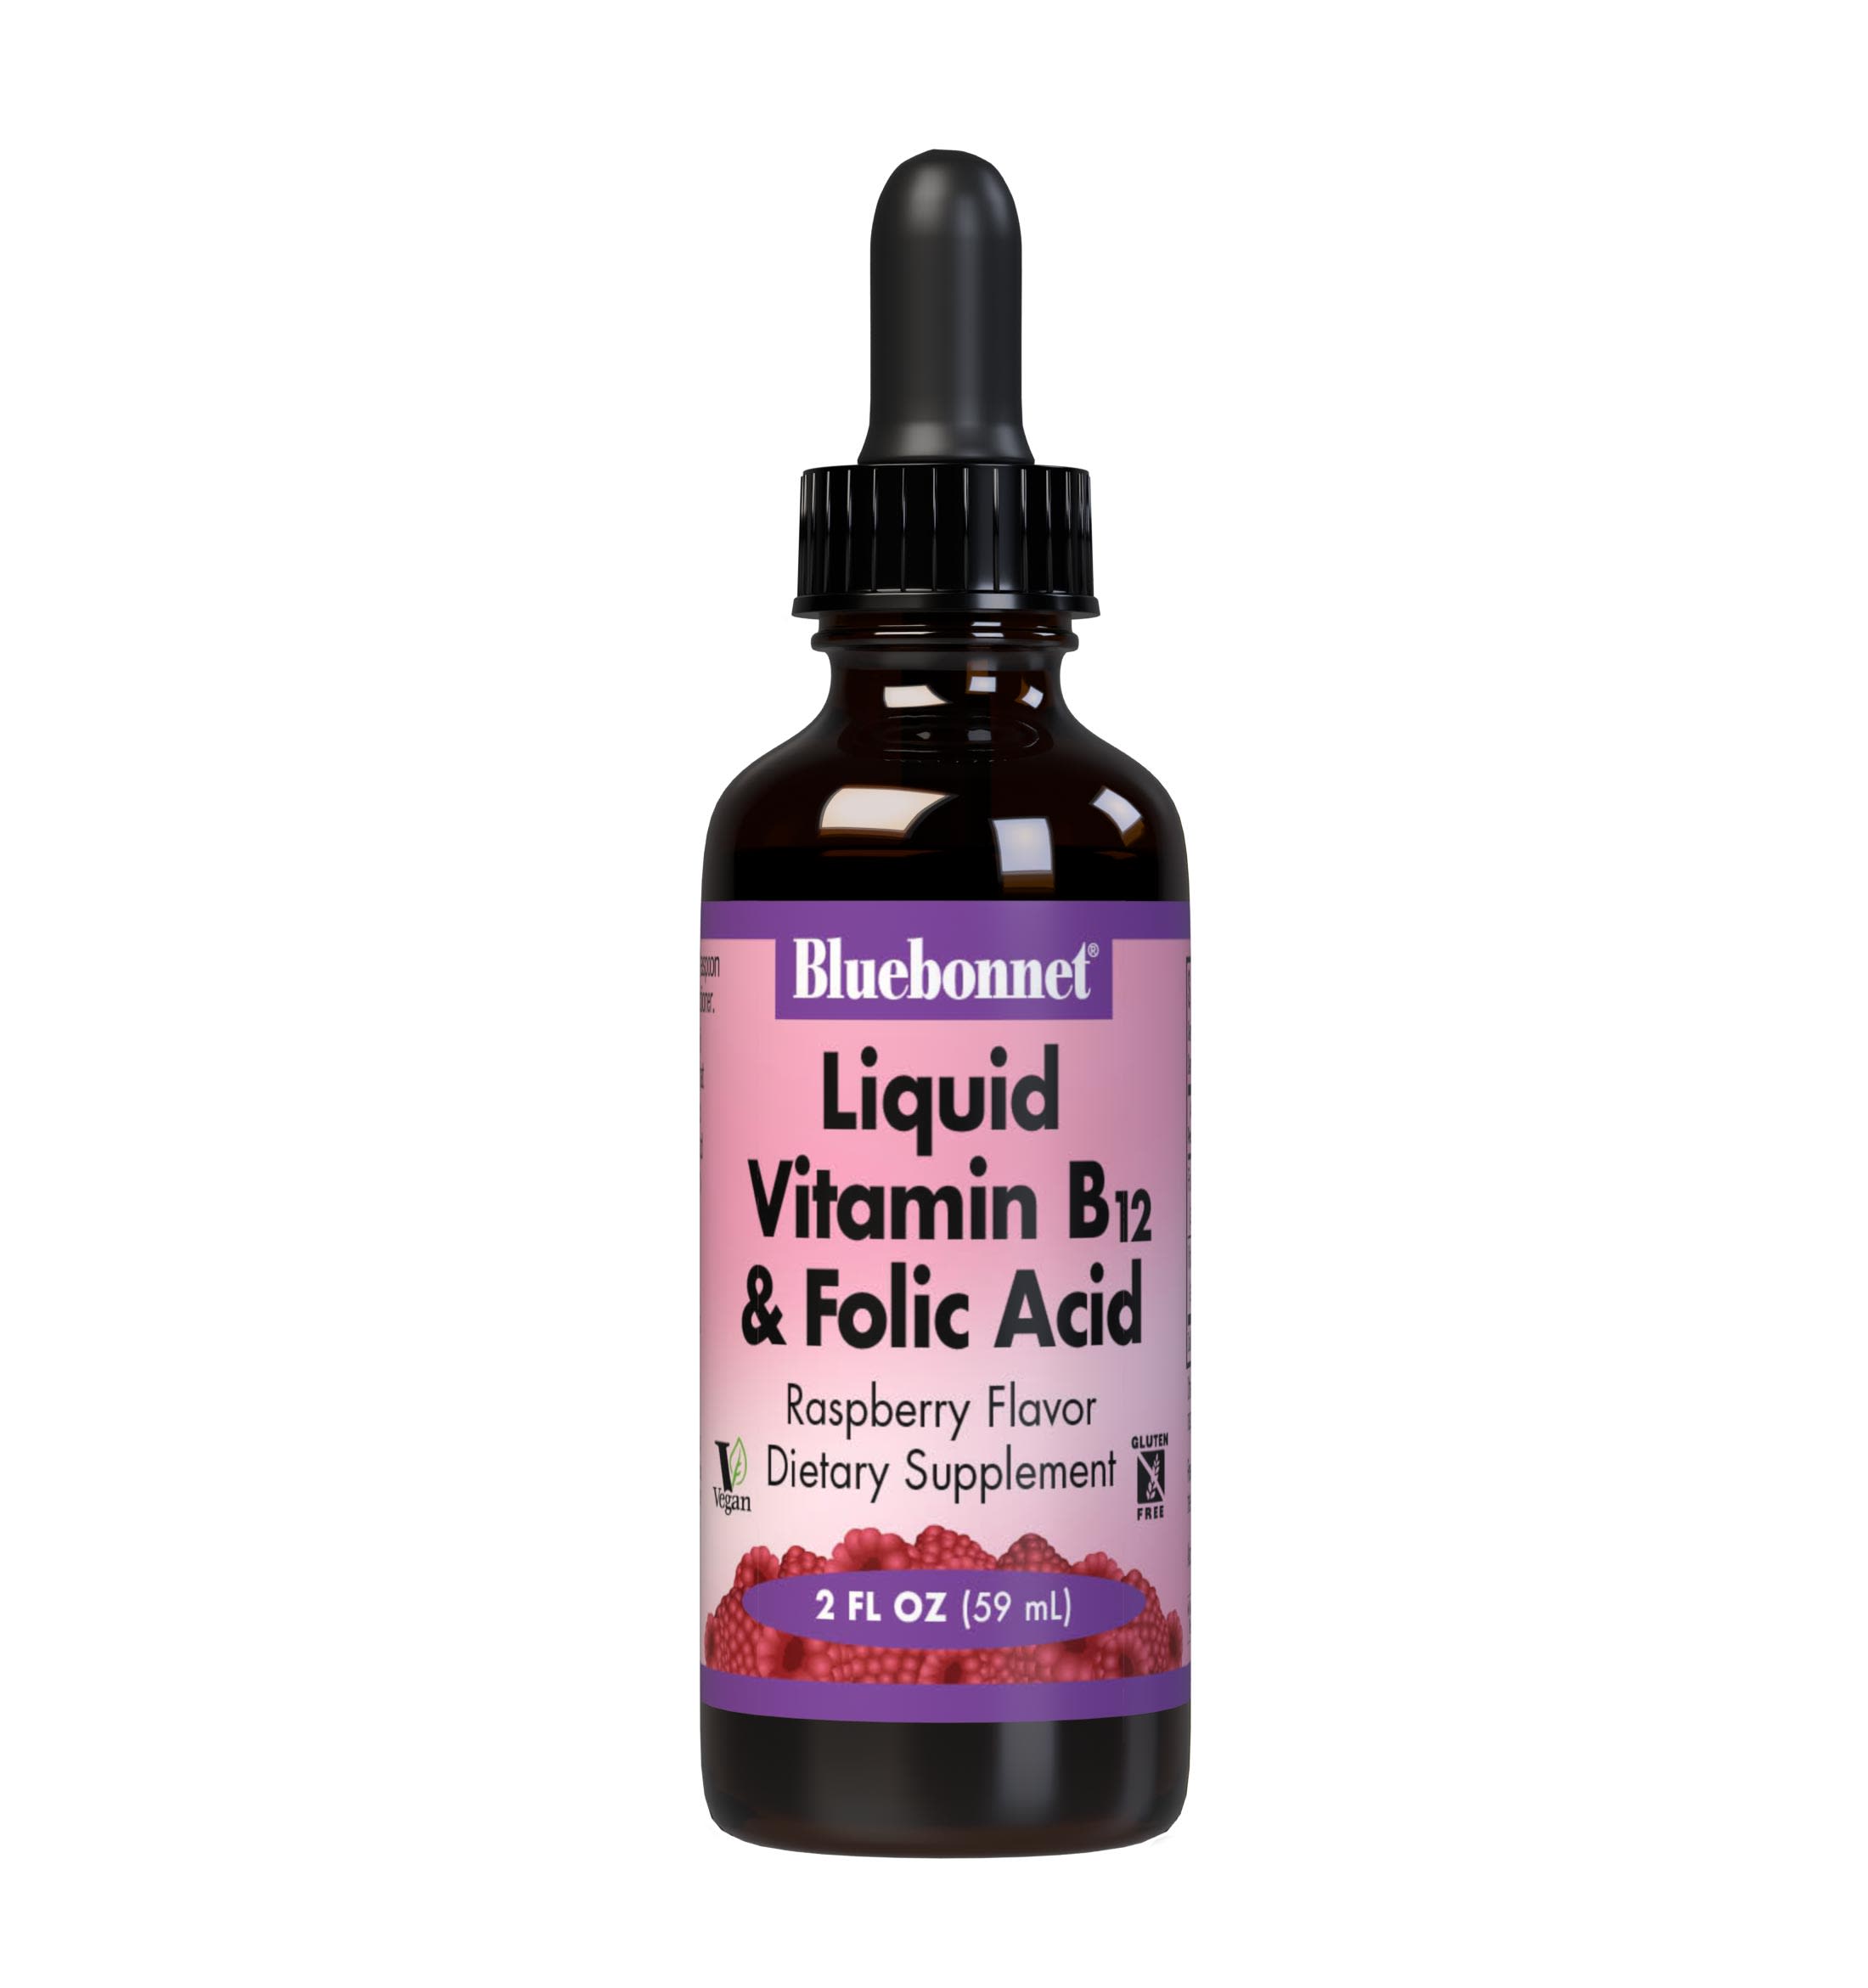 Bluebonnet’s Liquid Vitamin B12 & Folic Acid are formulated with fast-acting vitamin B12 and folic acid that supports cellular energy production and nervous system health. #size_2 fl oz